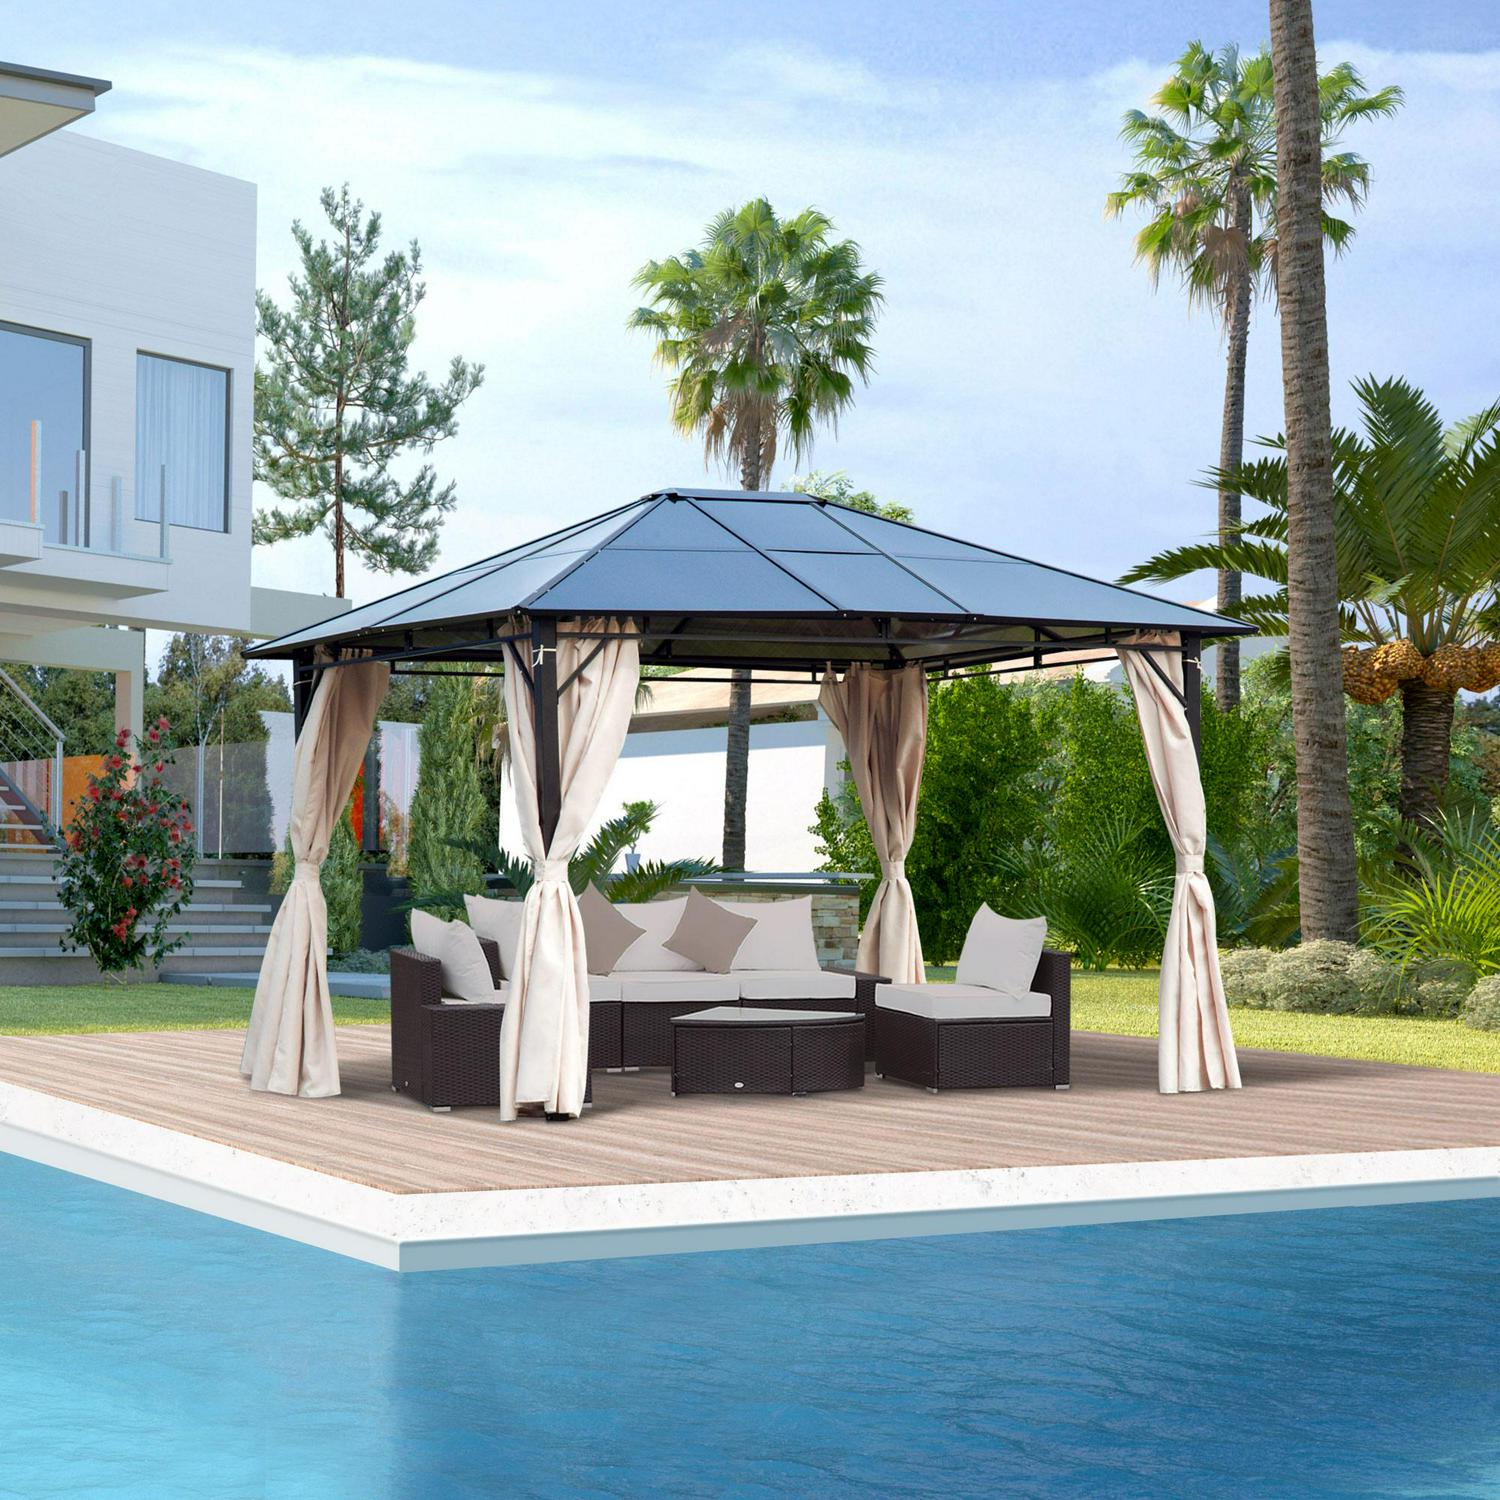 Hardtop Gazebo Canopy With Polycarbonate Roof - Brown